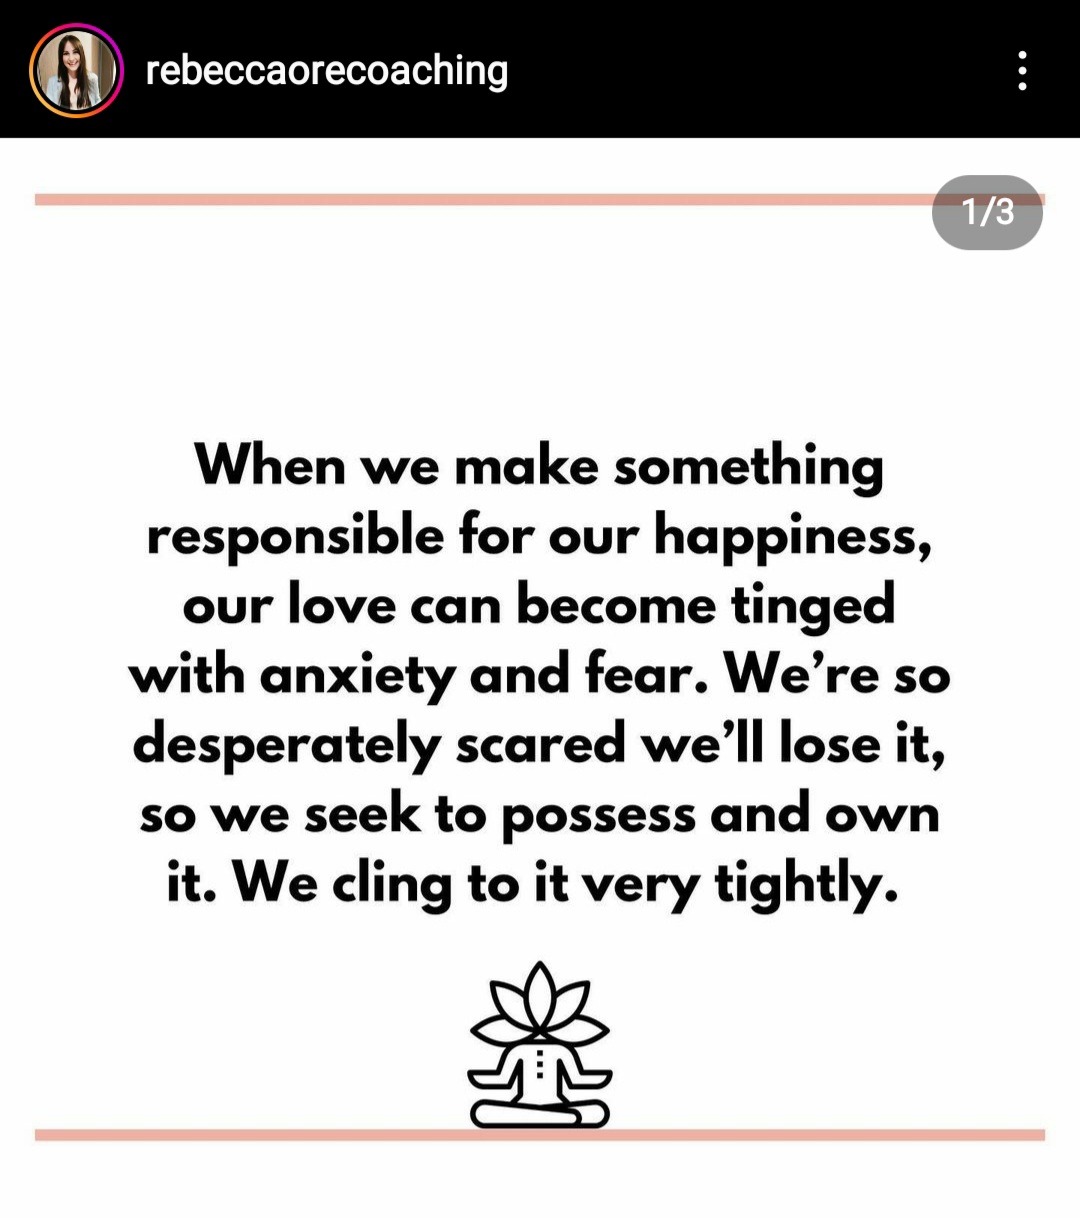 When we make something responsible for our happiness, our love can become tinged with anxiety and fear. We're so desperately scared we'll lose it, so we seek to possess and own it. We cling to it very tightly. Rebecca Ore Coaching, coaching tip